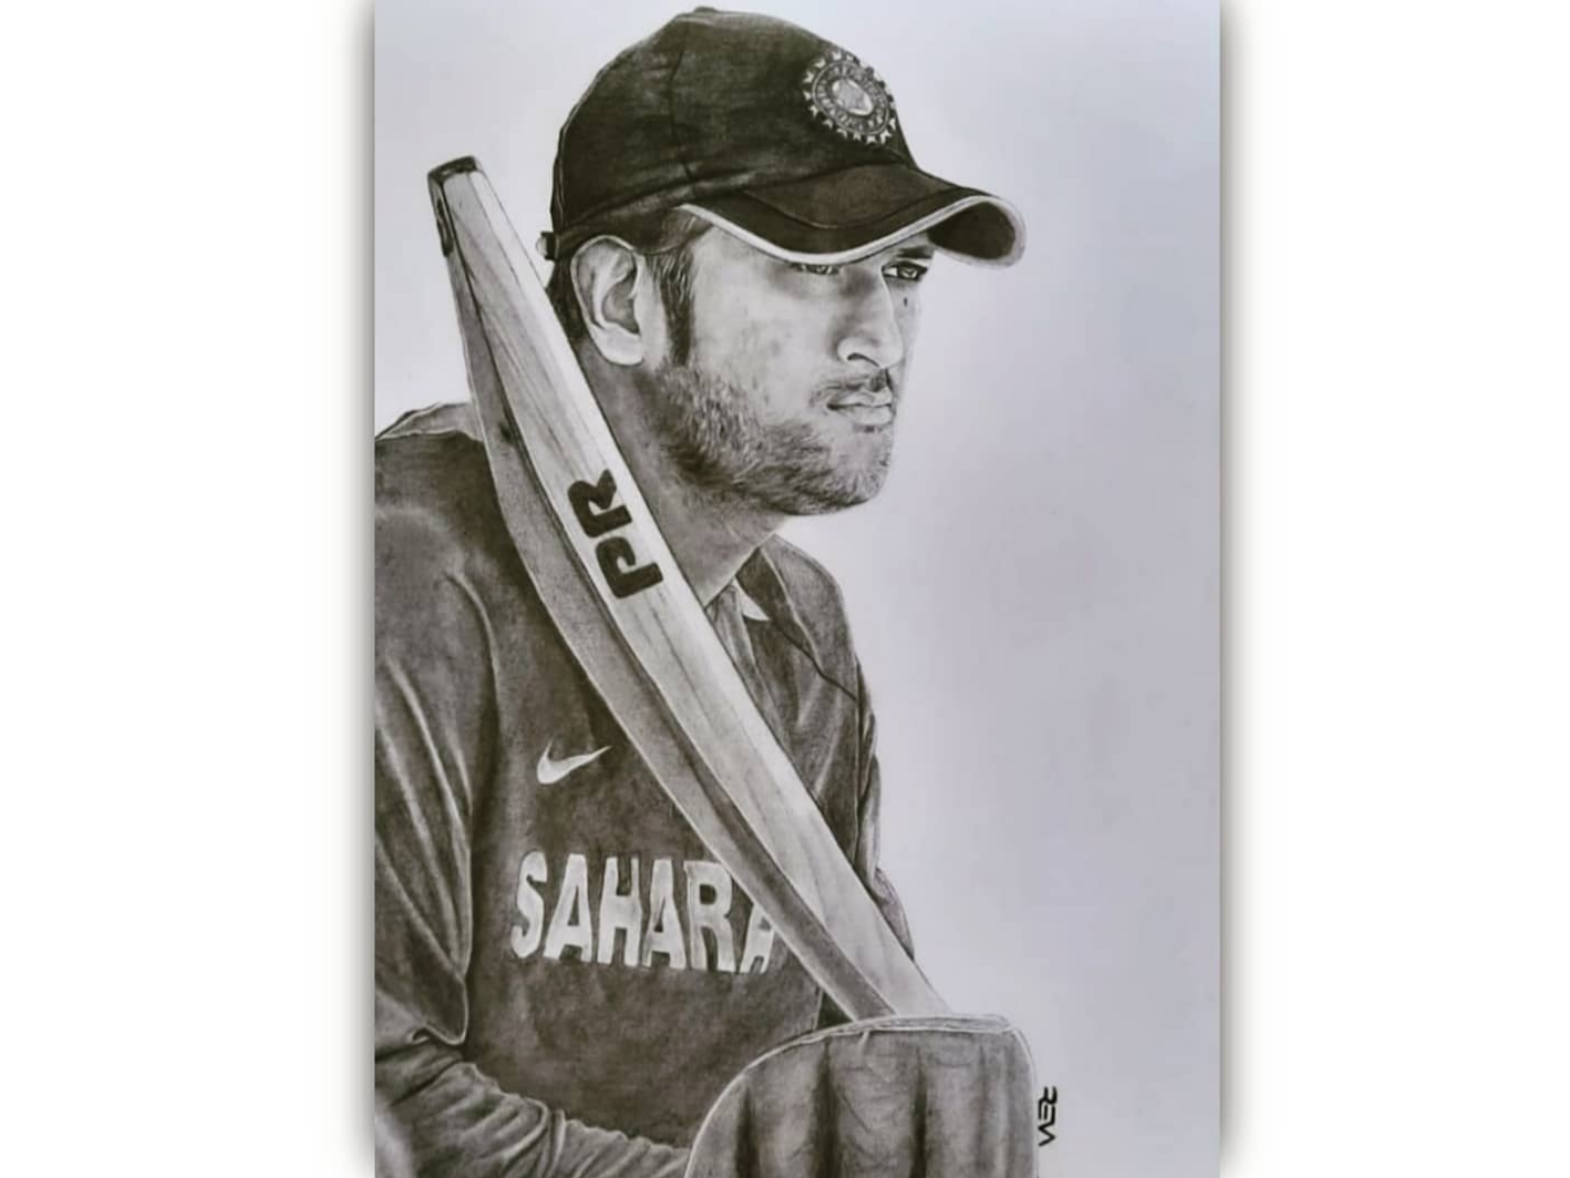 ArtistSriman on Twitter Thala is Back  1 Day to go Pencil Sketch of  MSDhoni ArtistSriman SrimanVisual Ipl2018 Csk Thala T20 Pencilsketch  WhistlePoduArmy httpstco4hVRqiyH2M  X